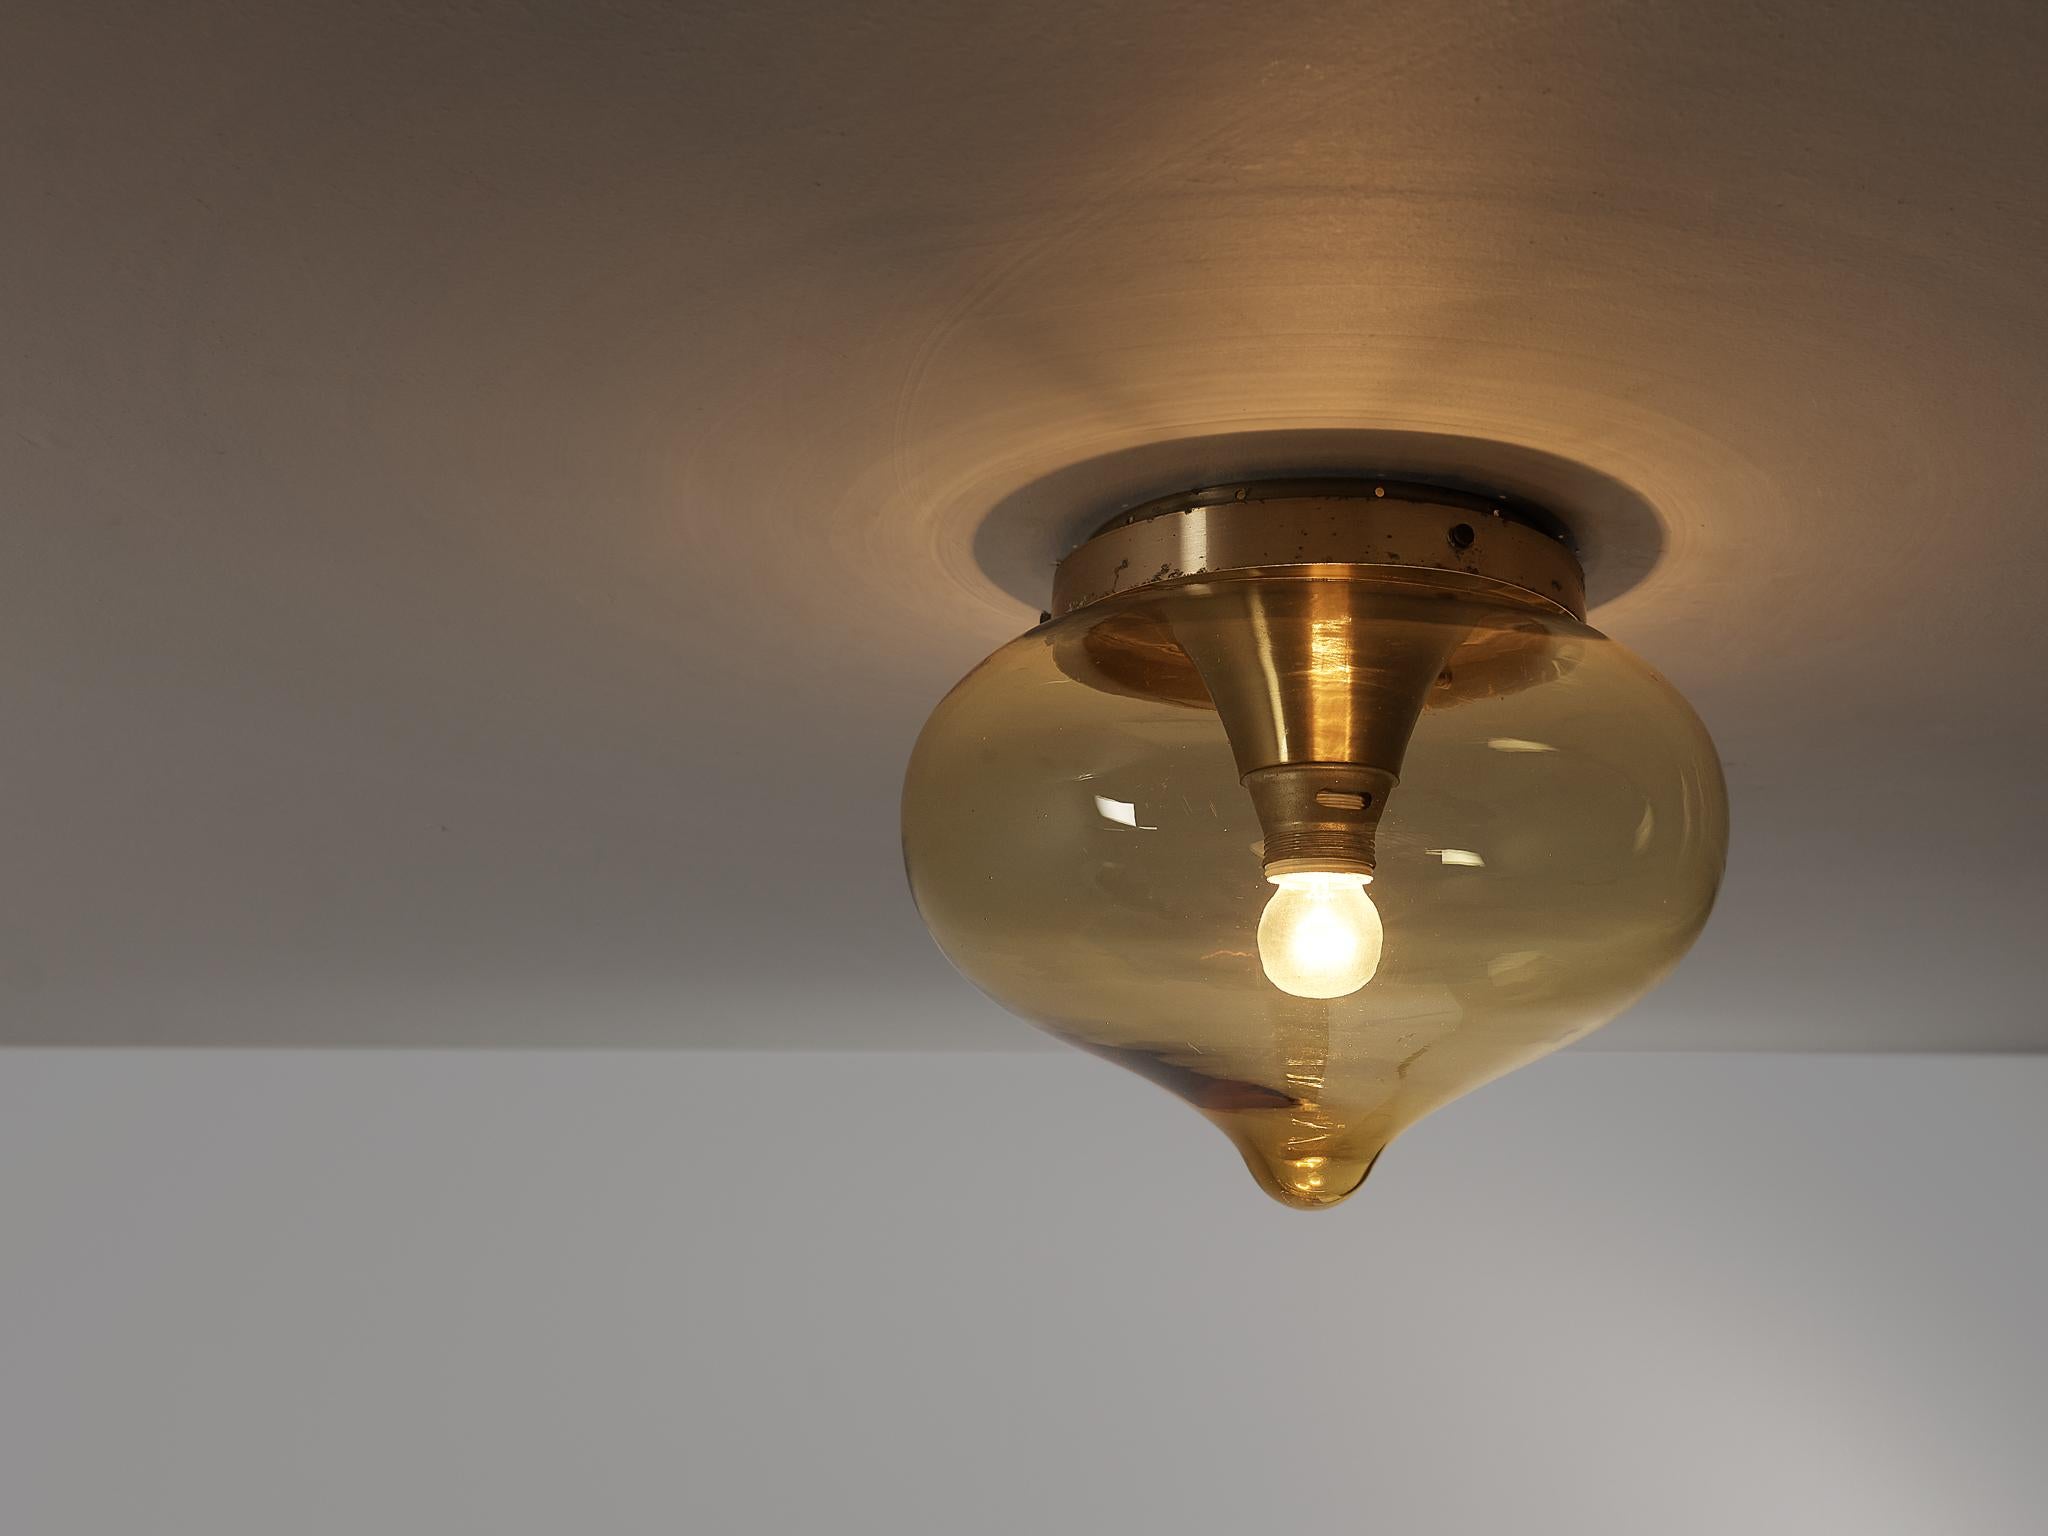 Ceiling light, brass, glass, aluminum, The Netherlands, 1960s

A stunning ceiling light made in Holland in the 1960s. A tear drop shaped glass orb in a golden shade that radiates a warm and diffuse light. The light source reflects on the brass,